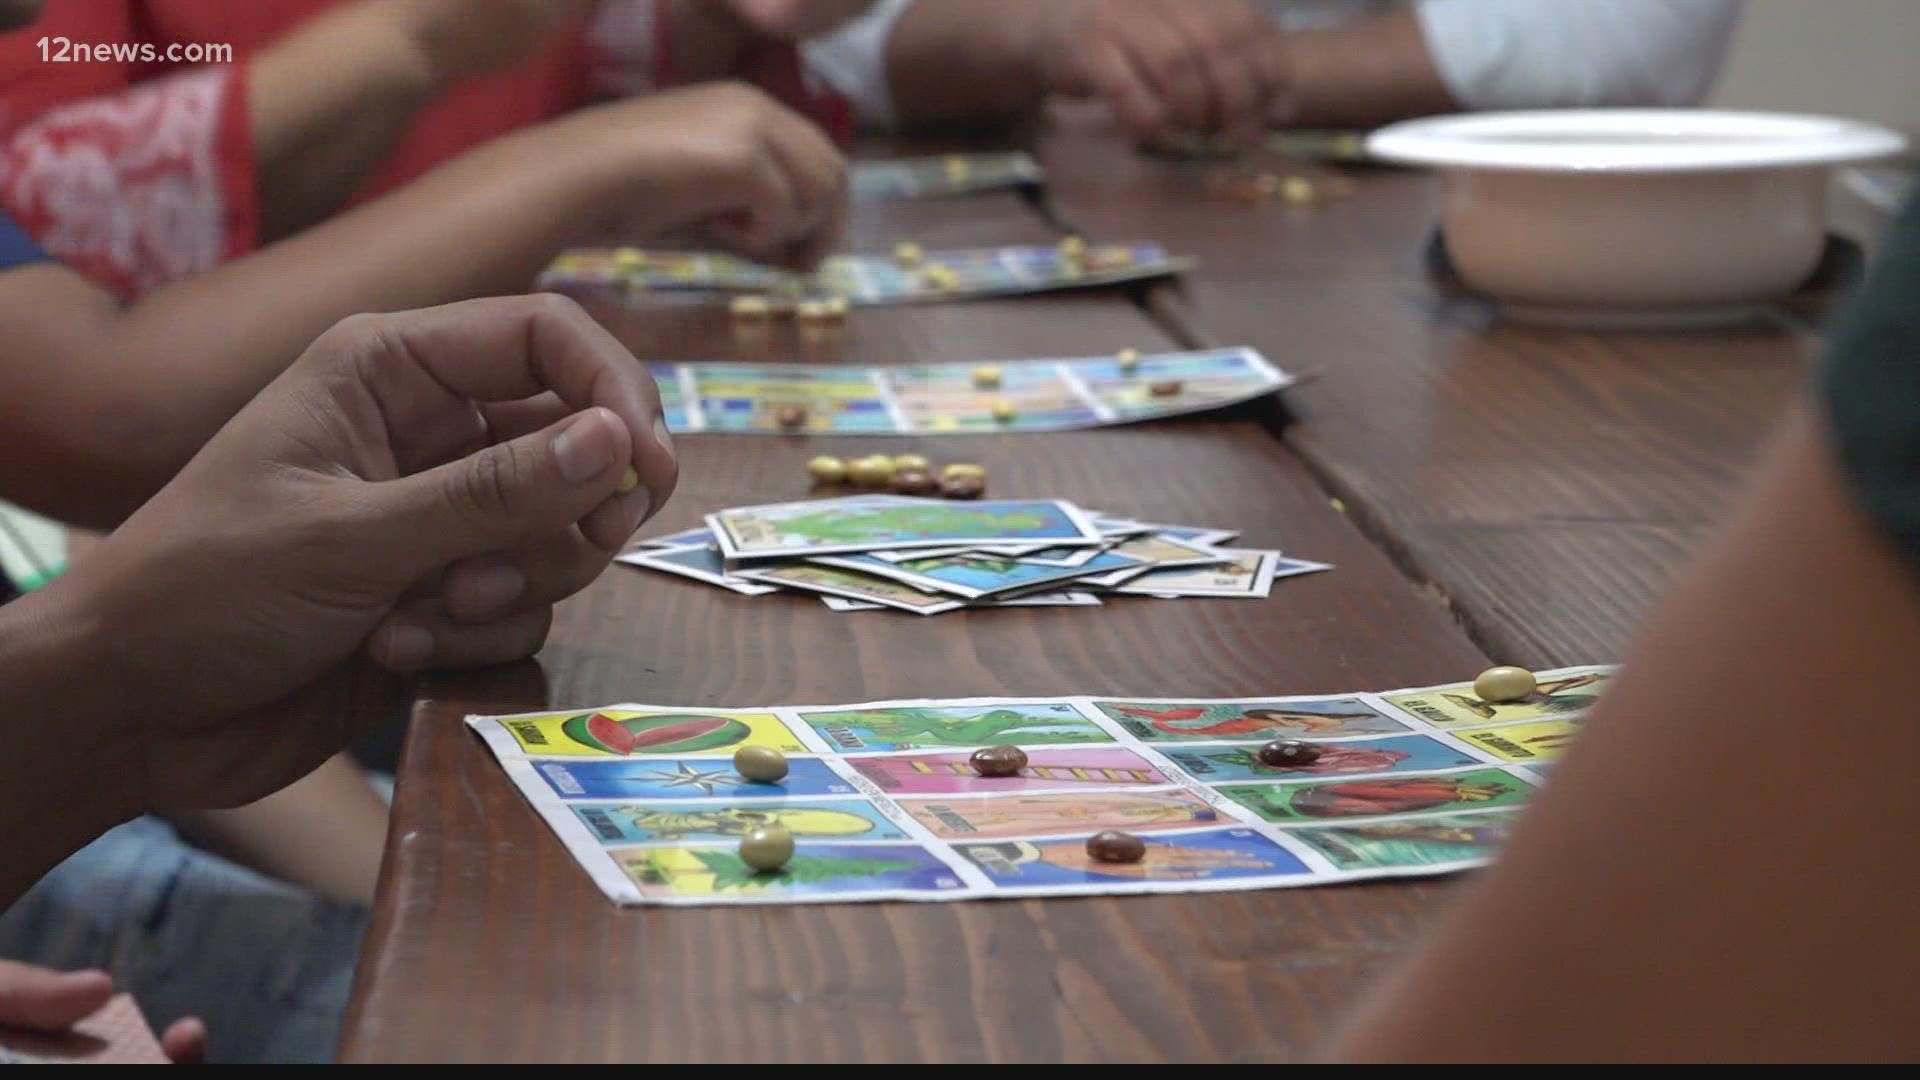 America’s favorite game of chance is Bingo, but south of the border in Mexico luck is tested on La Lotería.